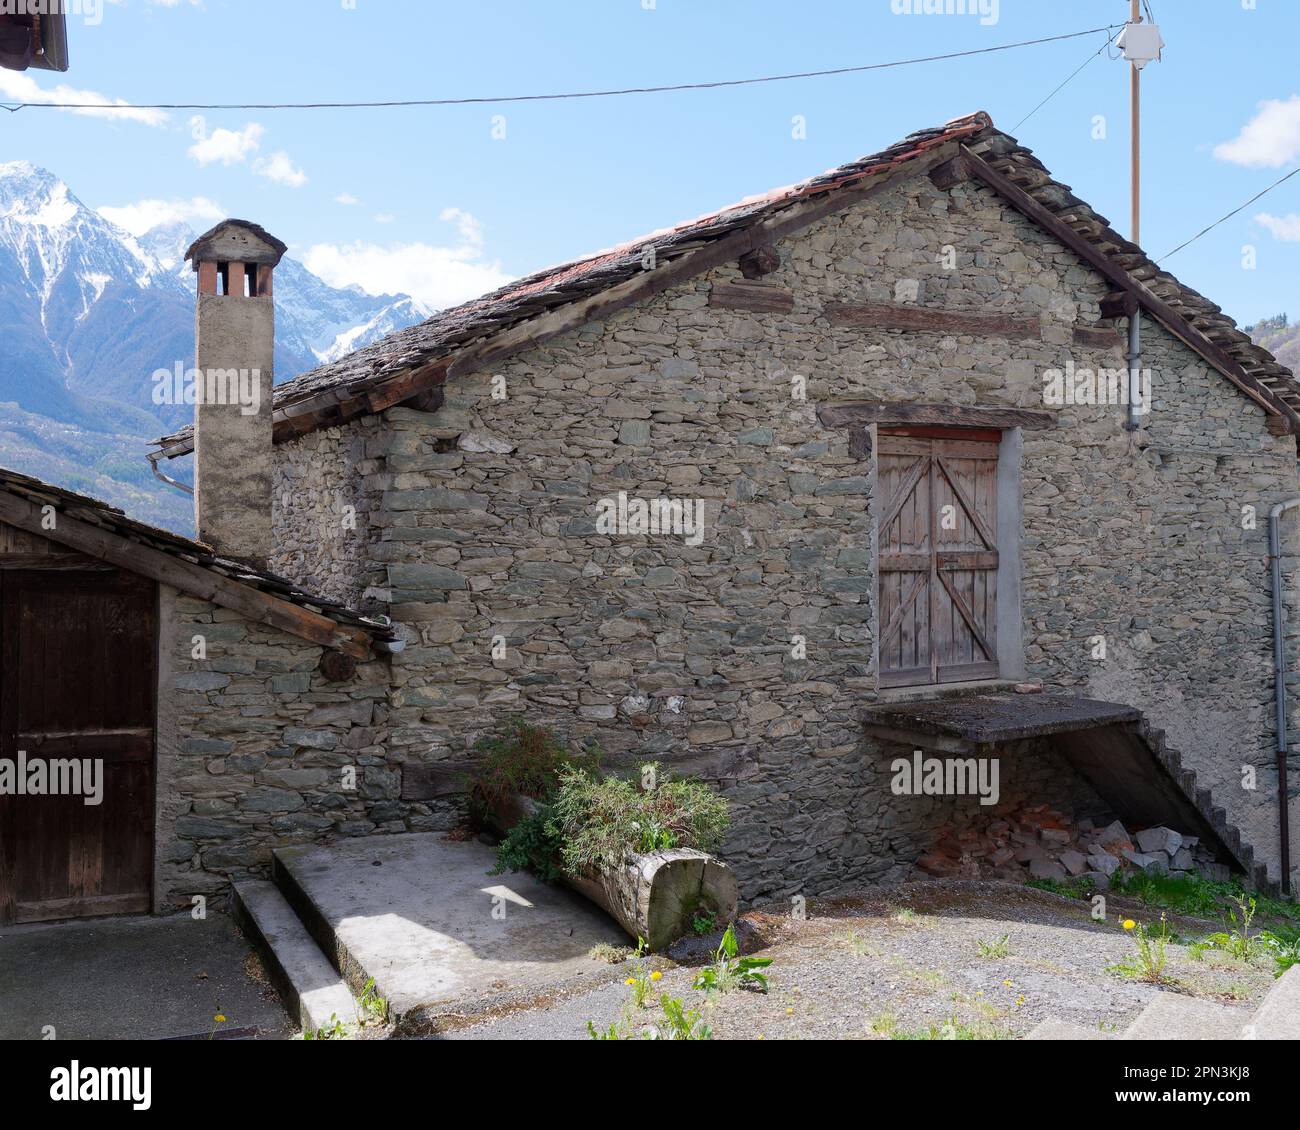 Traditional stone built property with chimney stack near Nus in the Aosta Valley, Italy Stock Photo